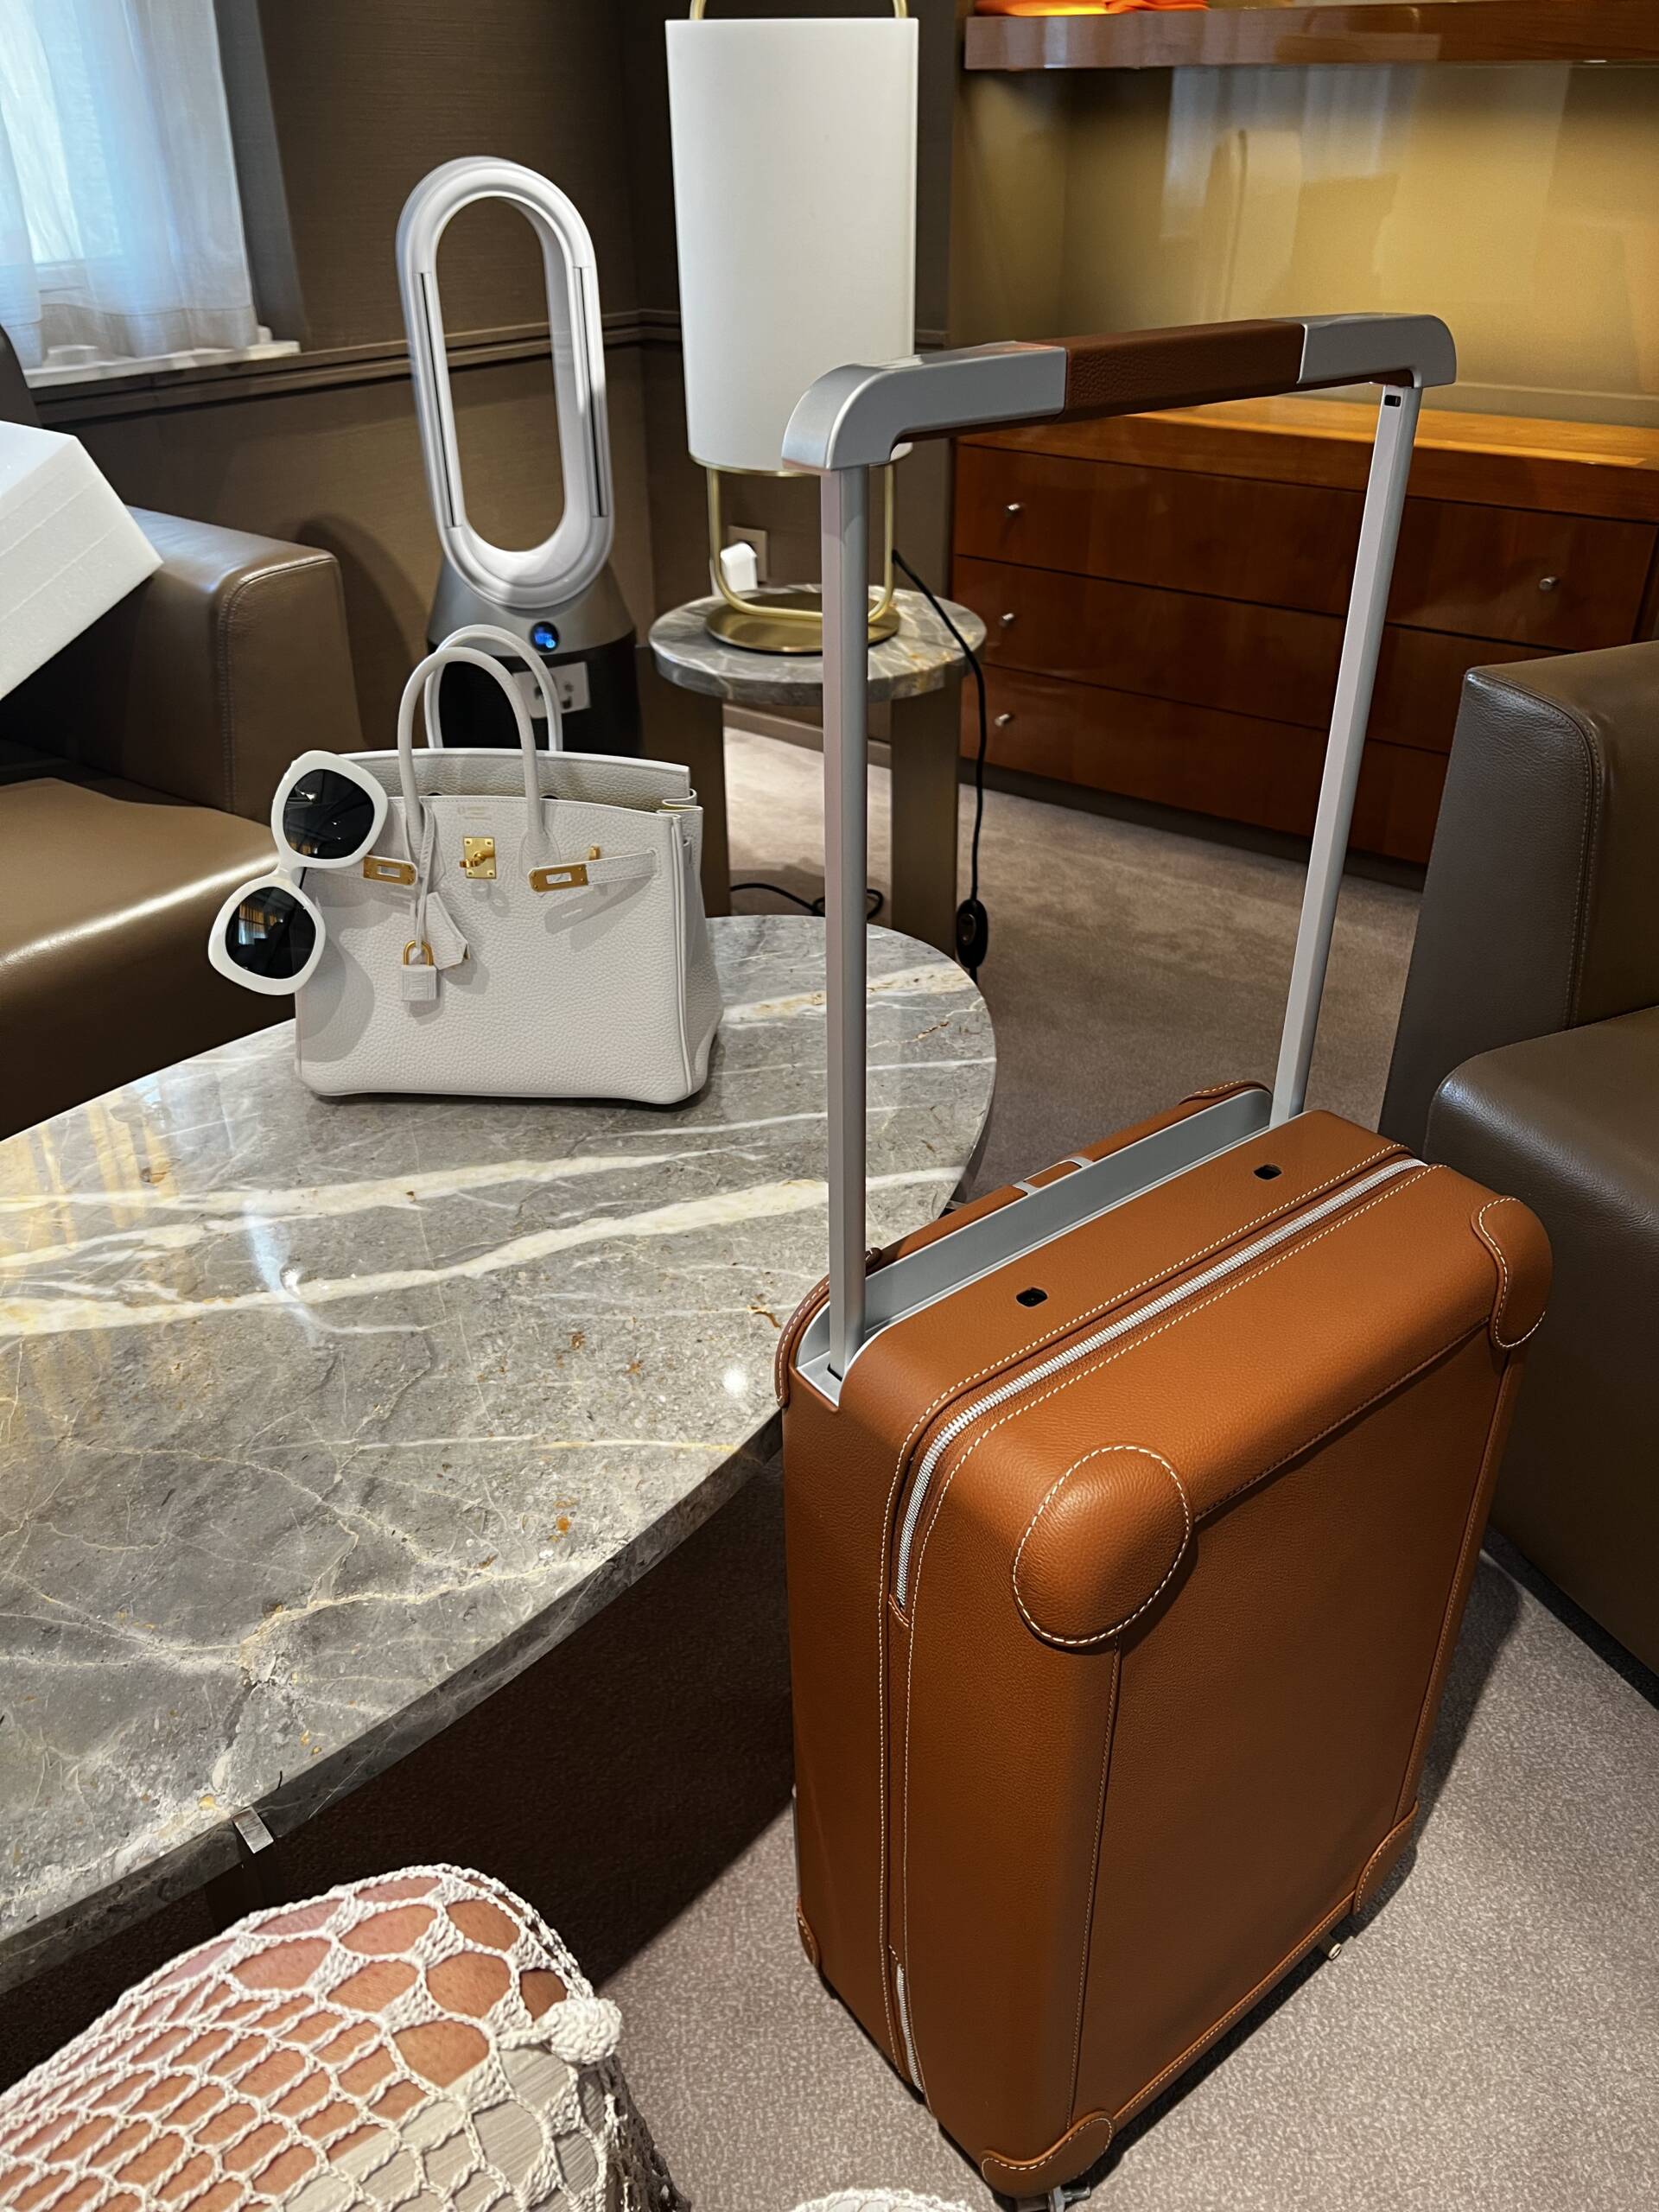 Hermès Rolling Mobility Suitcase R.M.S. - Odyssey